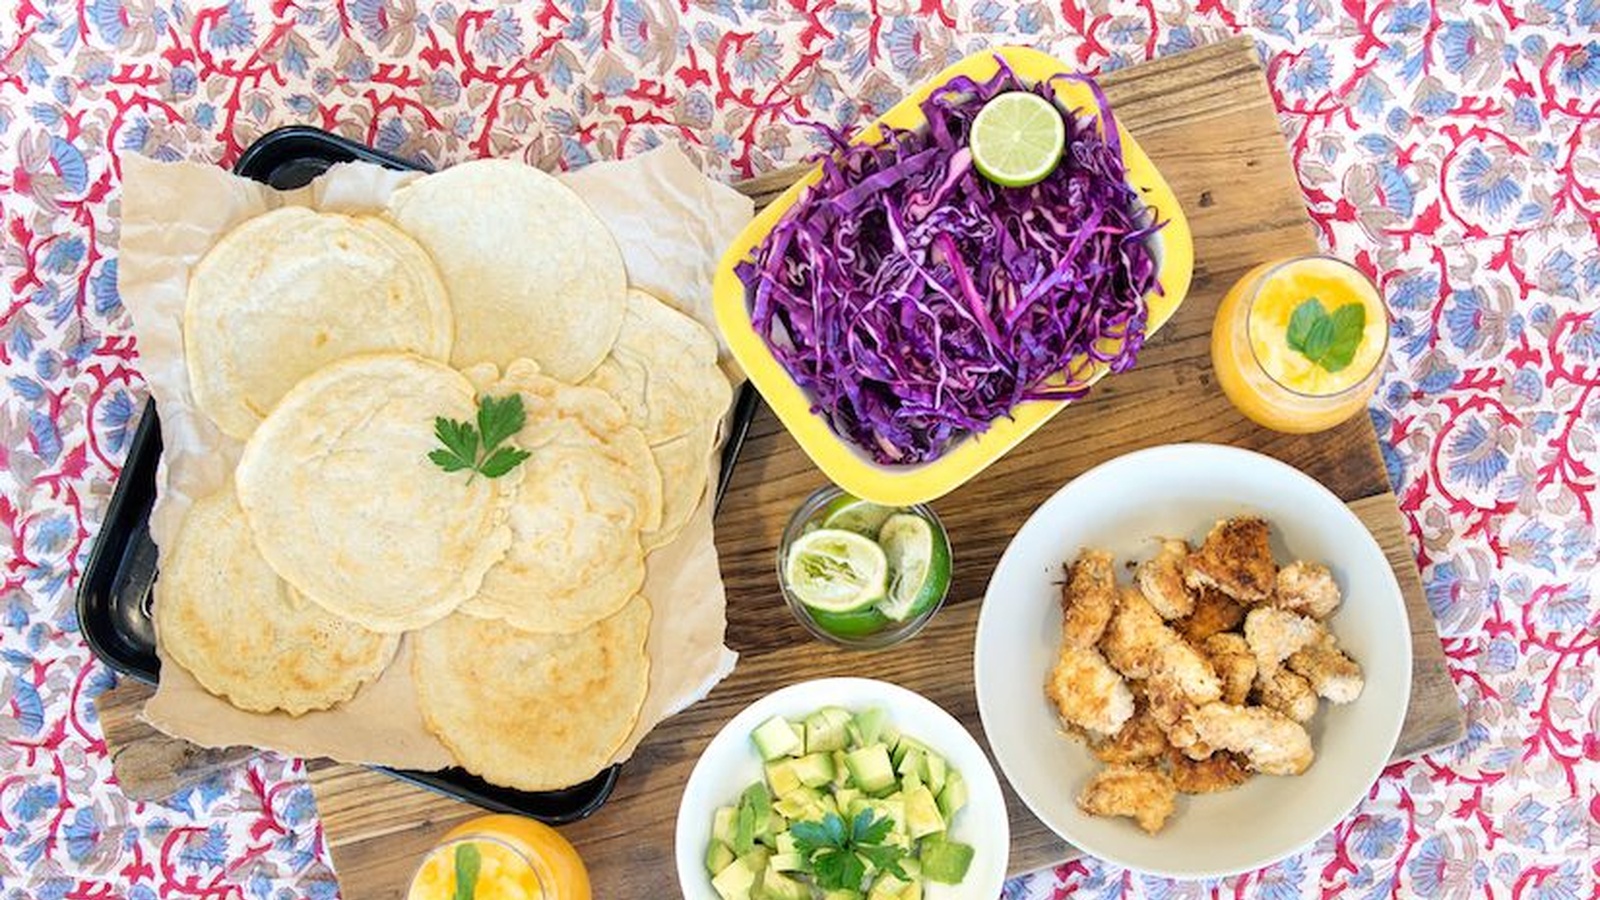 Fish Tacos With Cabbage Slaw And Gluten-Free Tortillas